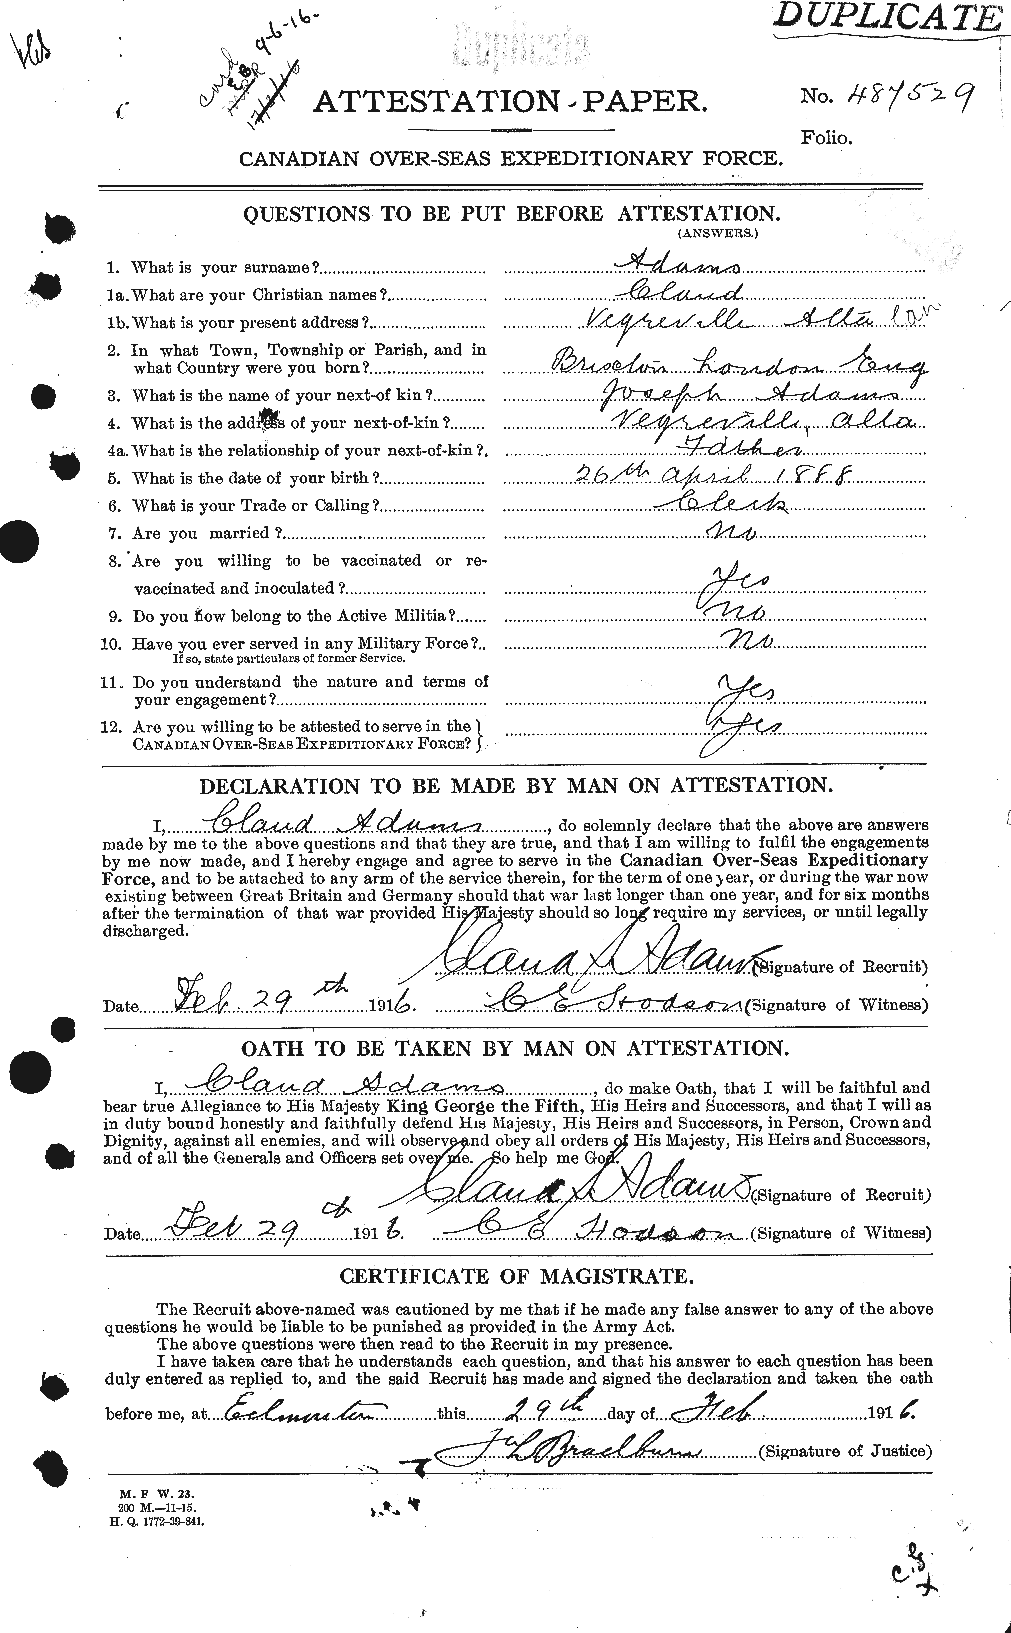 Personnel Records of the First World War - CEF 202644a